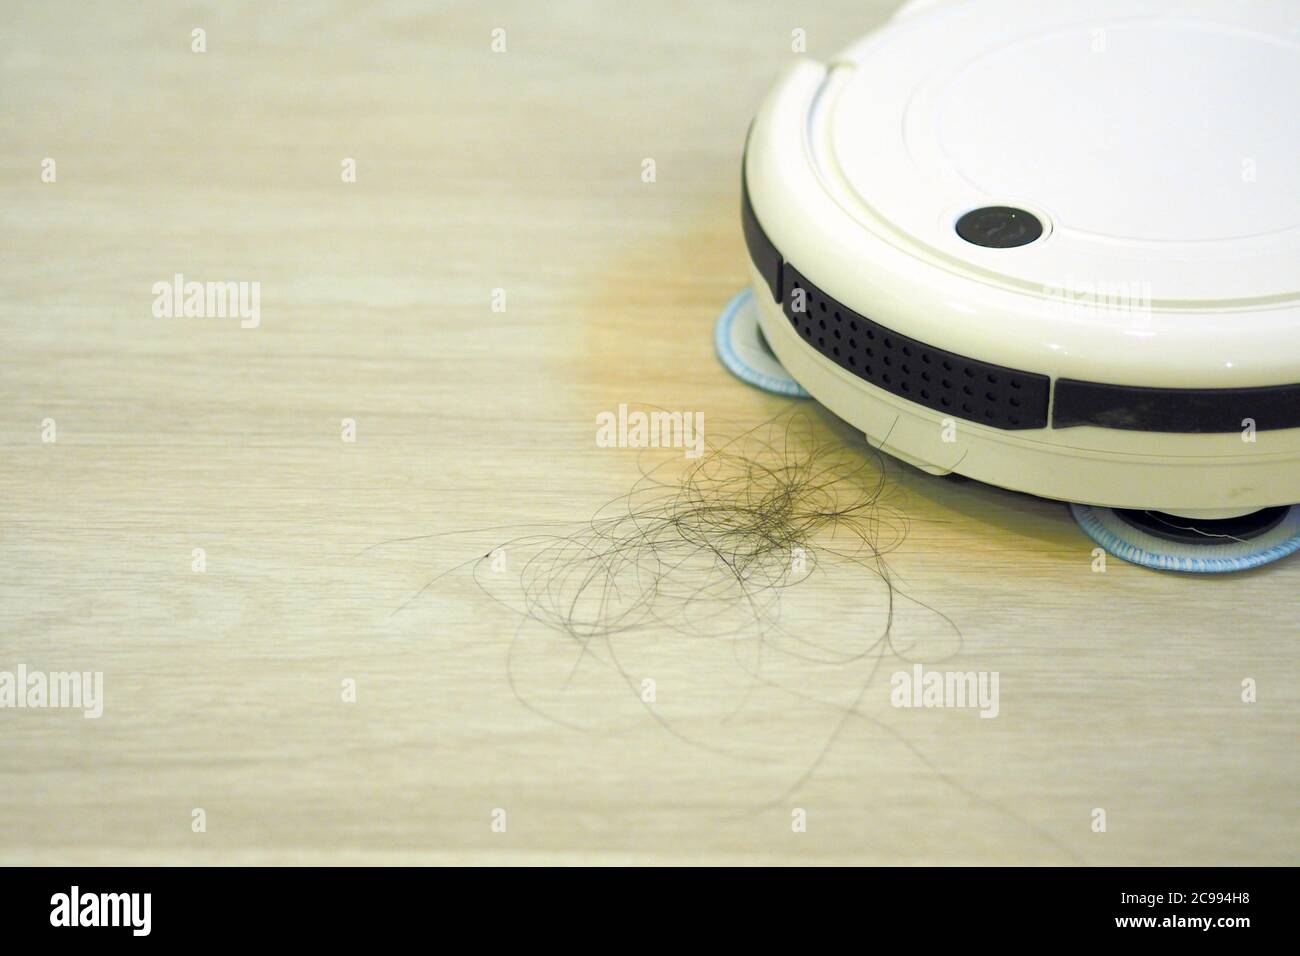 The robot vacuum cleaner is cleaning floor. Stock Photo